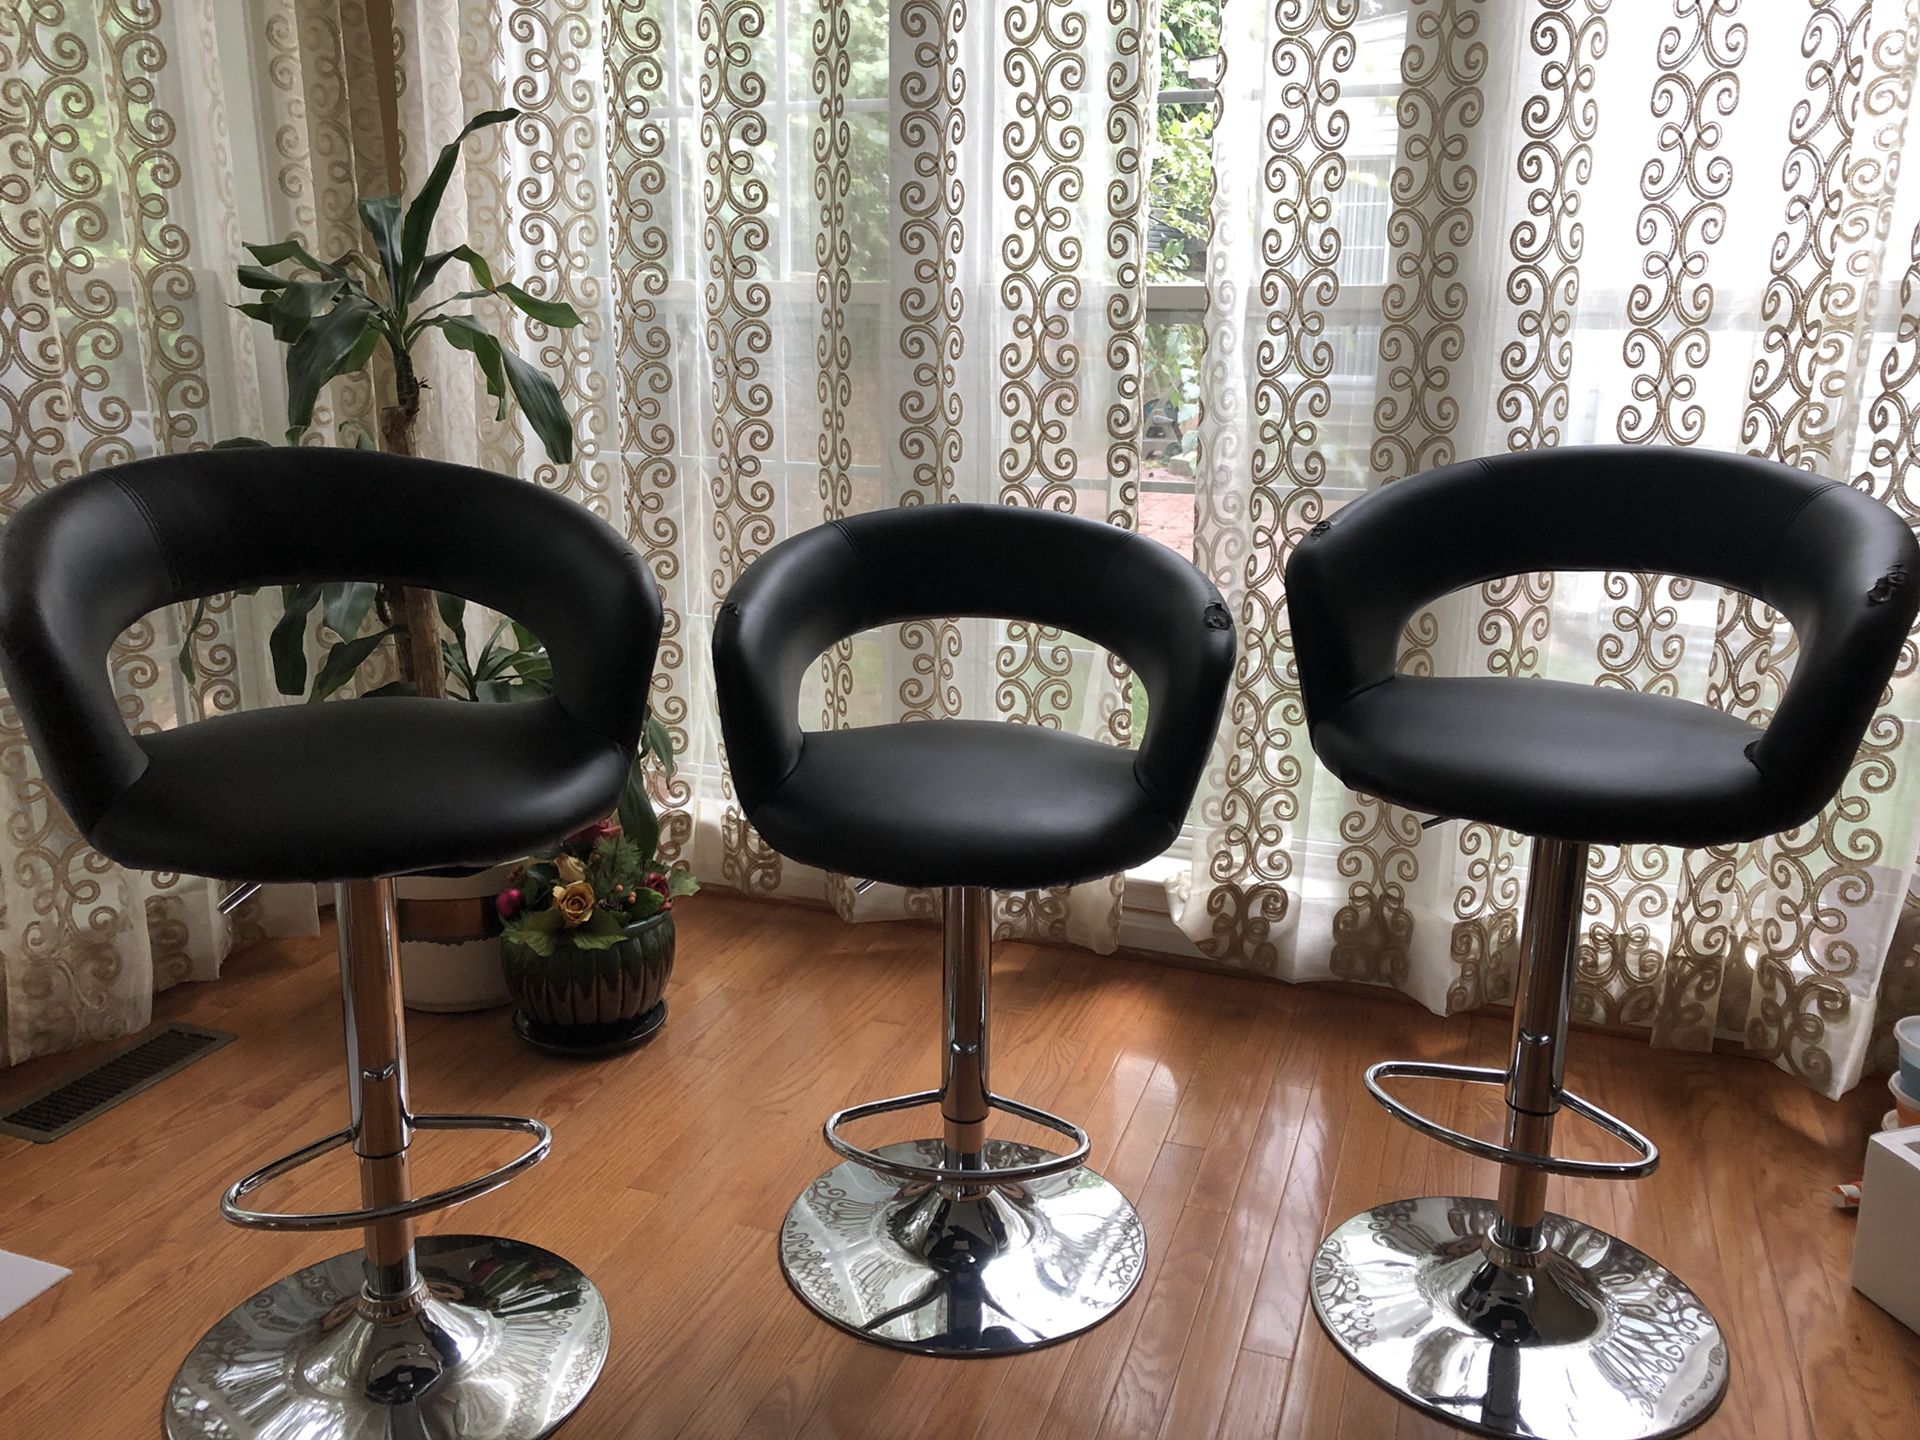 Swivel bar chairs all for $20